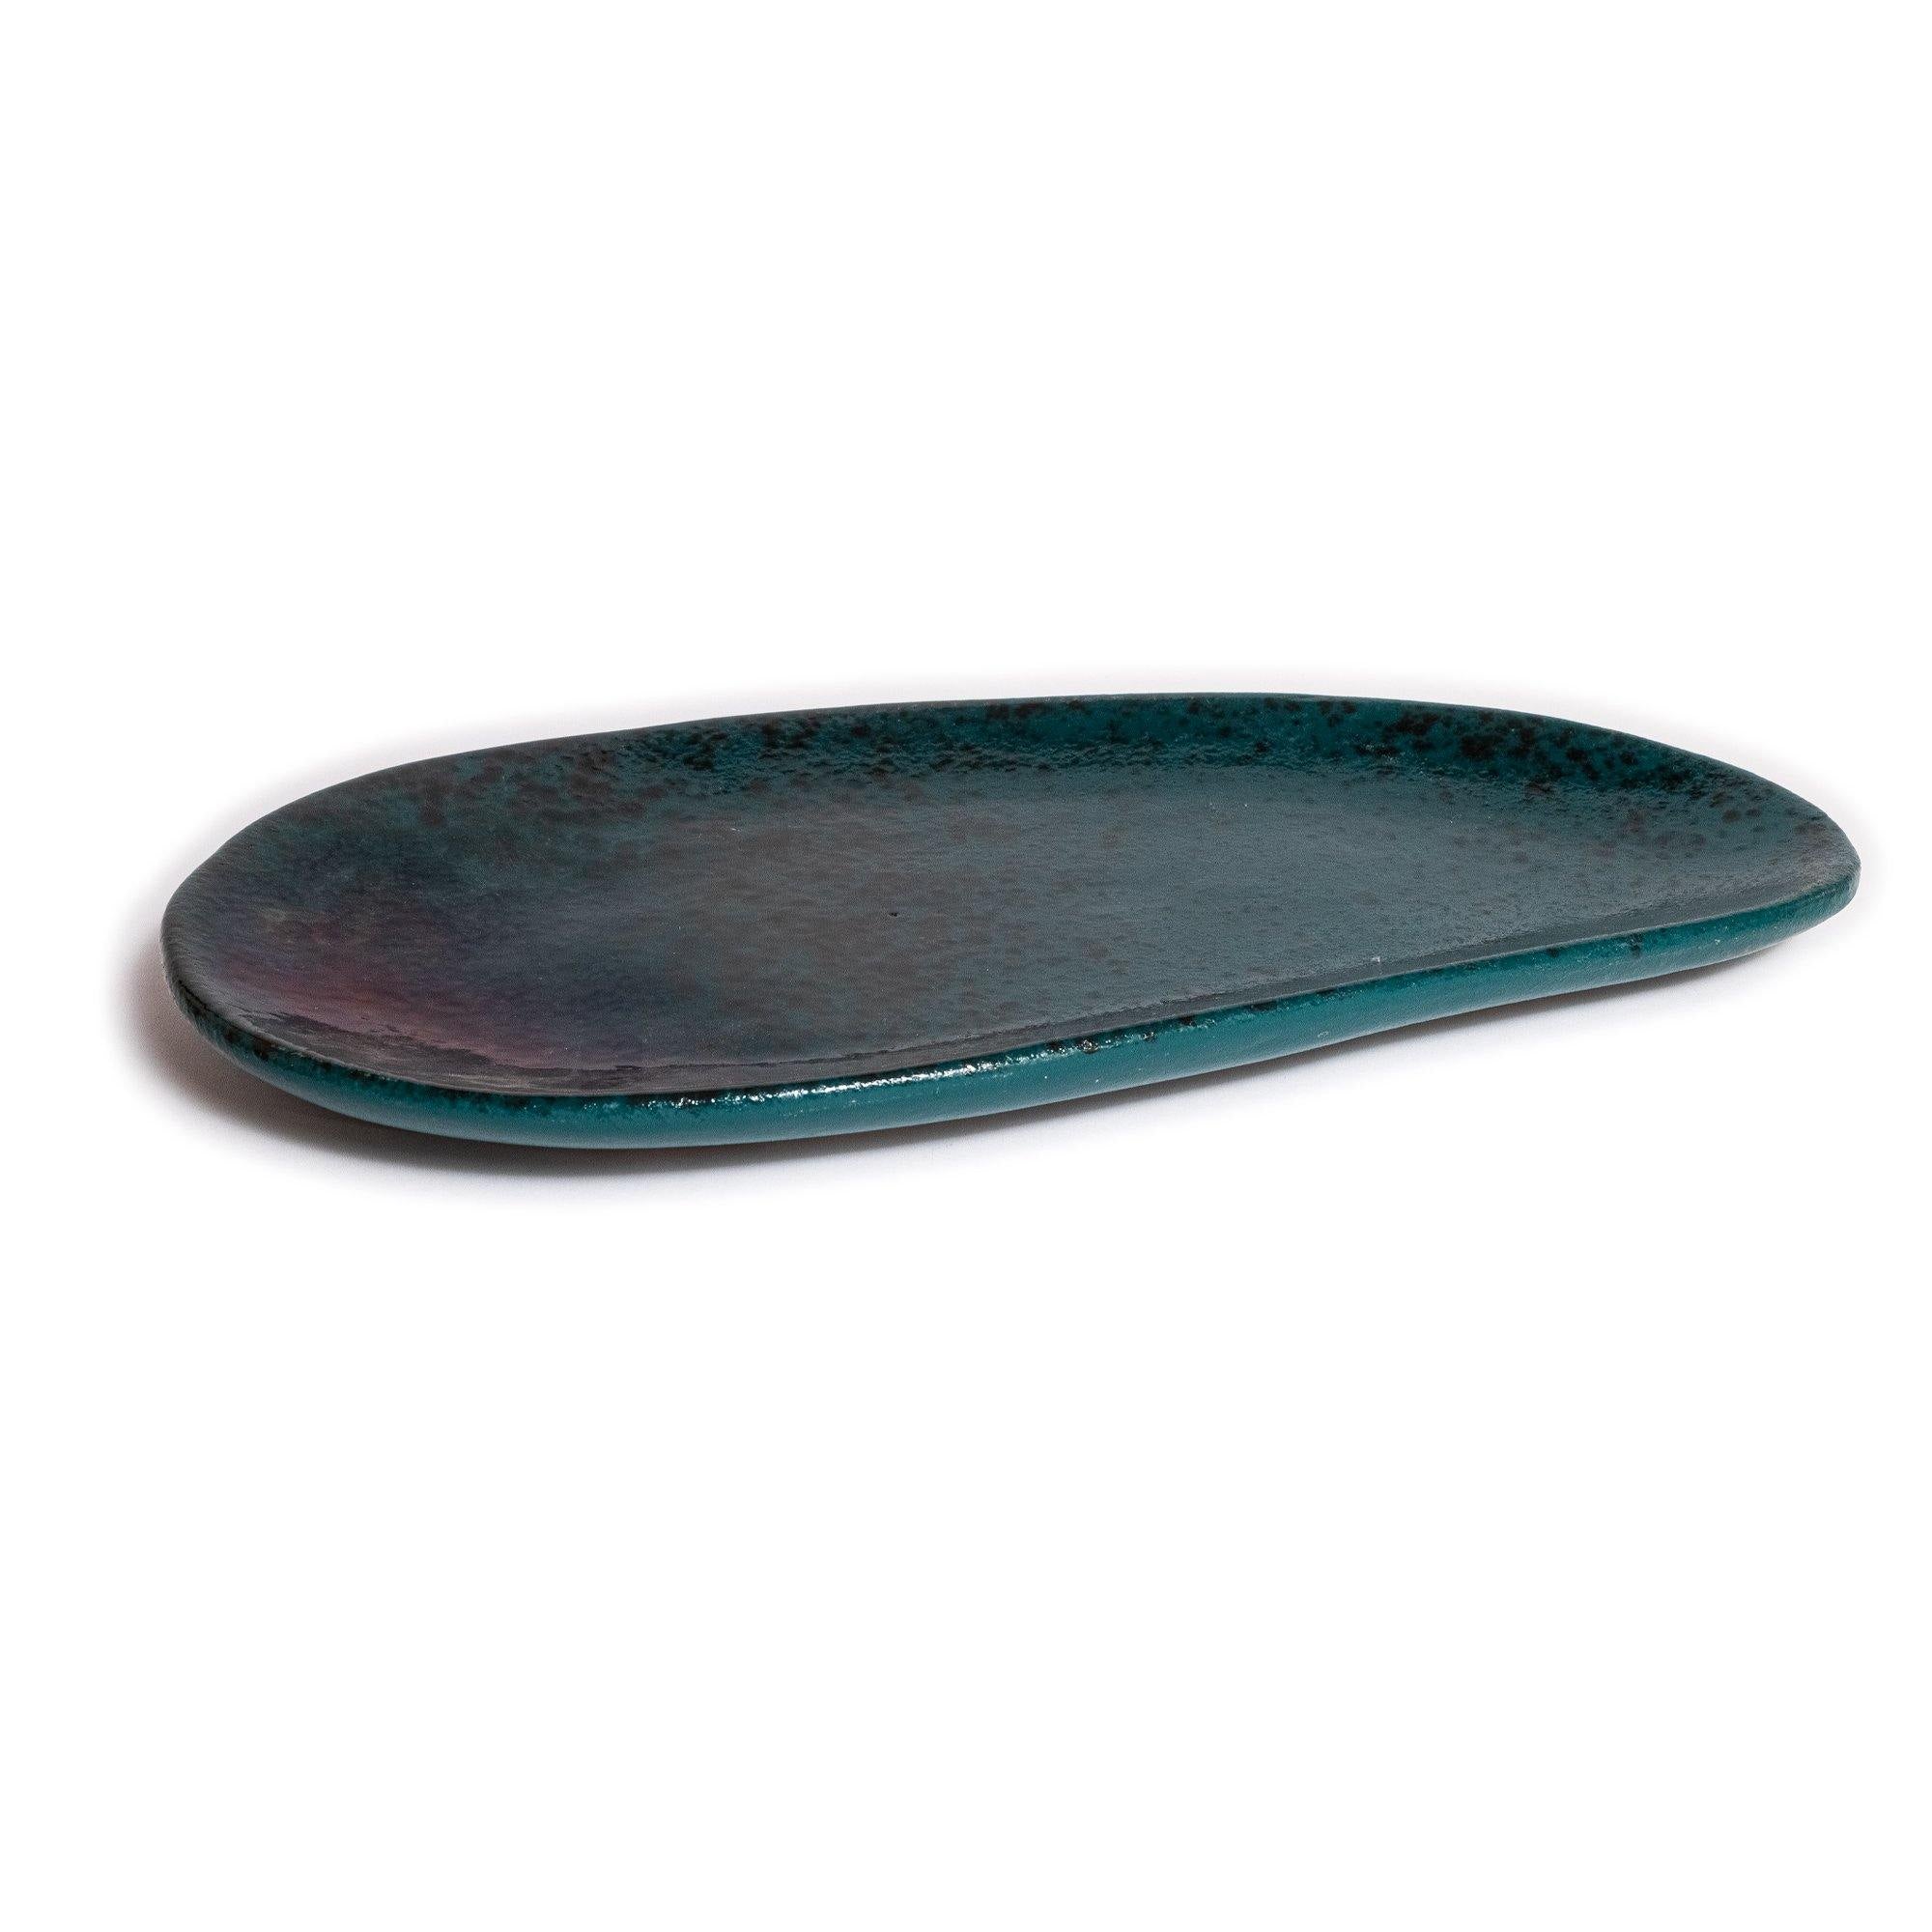 Copper And Teal Serving Tray - Chef May Shop